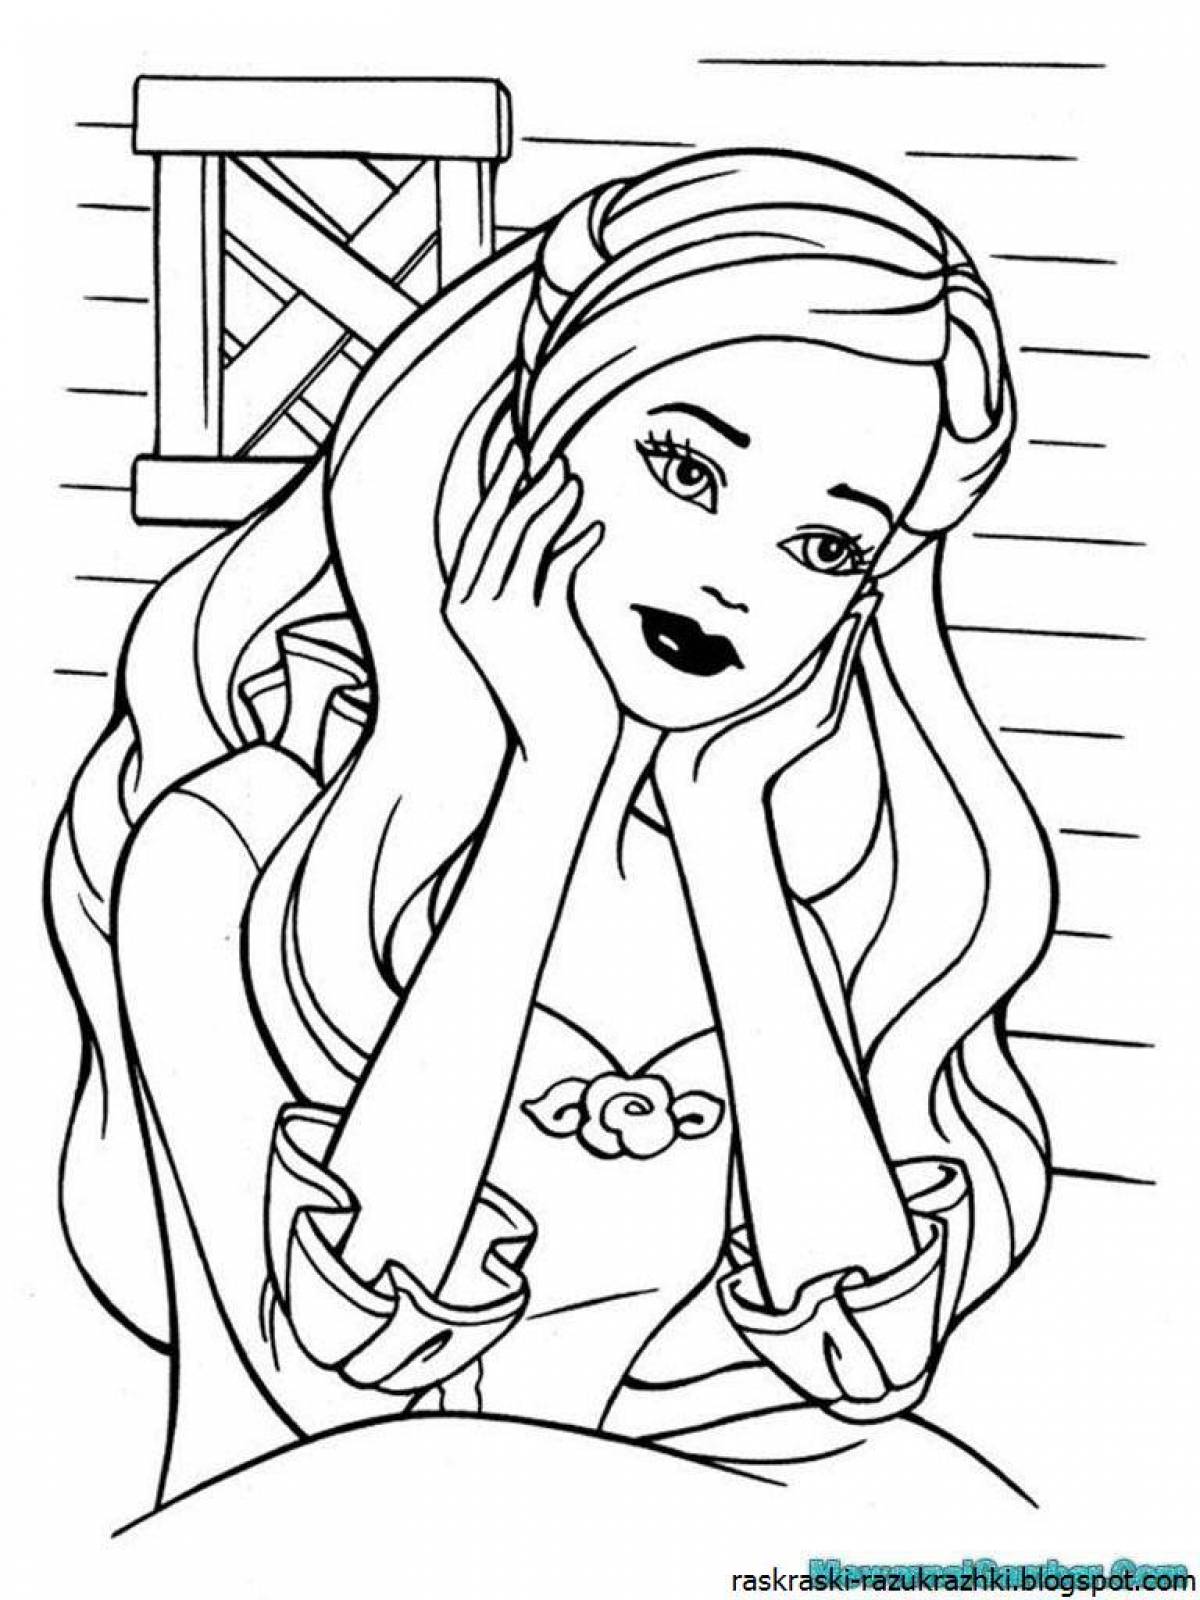 Innovative coloring pages for girls 10 years old